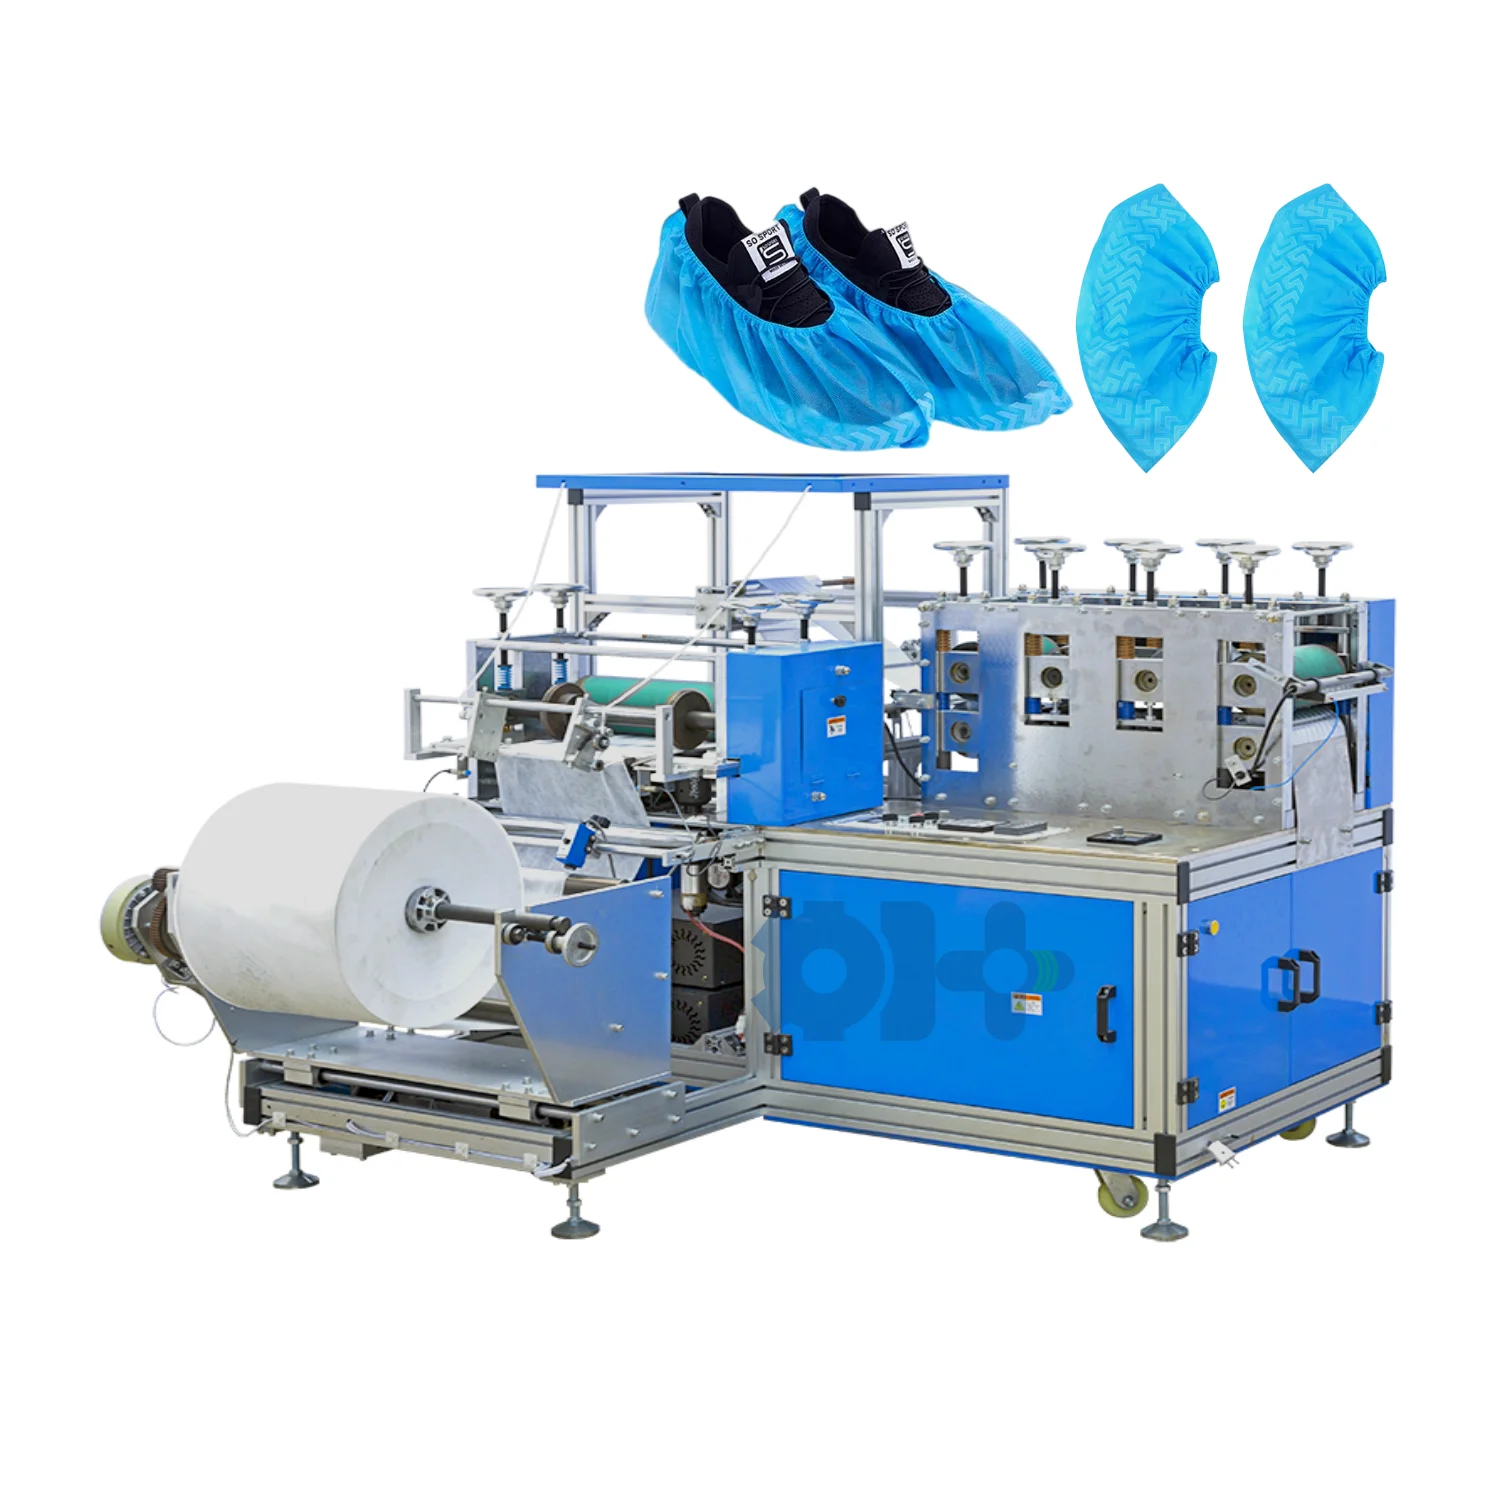 Deheng Full Automatic Foot Covers Machine Disposable Nonwoven Shoe Cover Packing Machine (1600583816246)